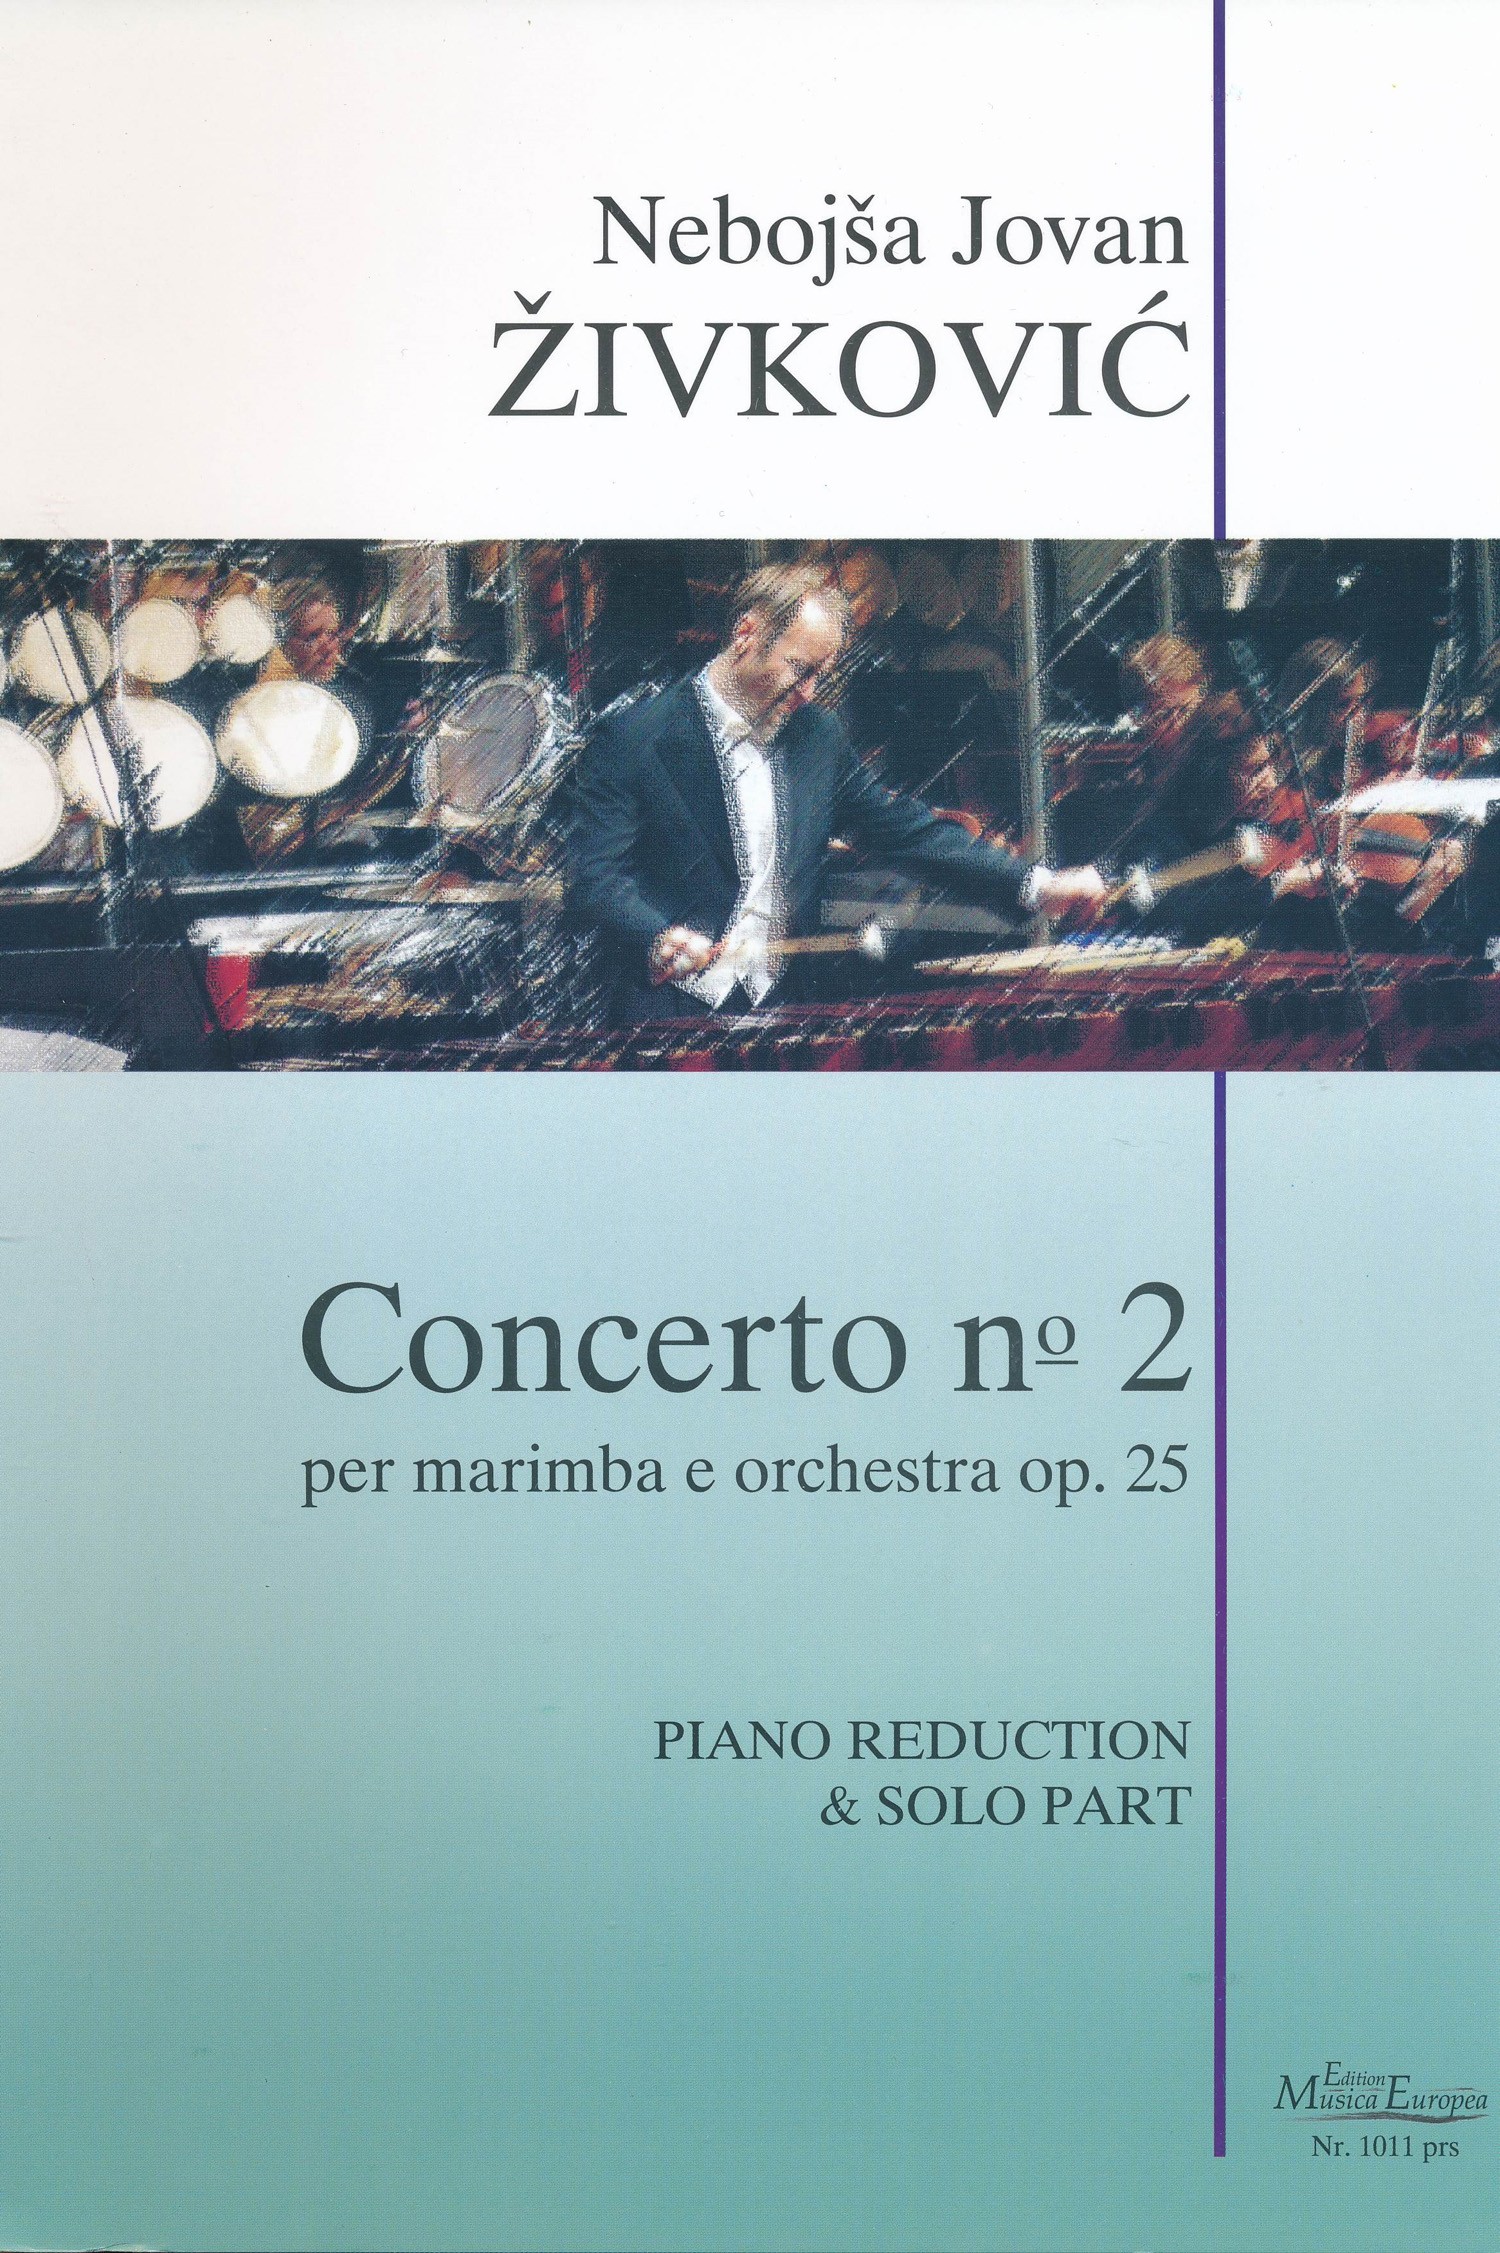 Concerto No. 2 for marimba and orchestra op.25 (Piano Red) by Nebojsa Zivkovic